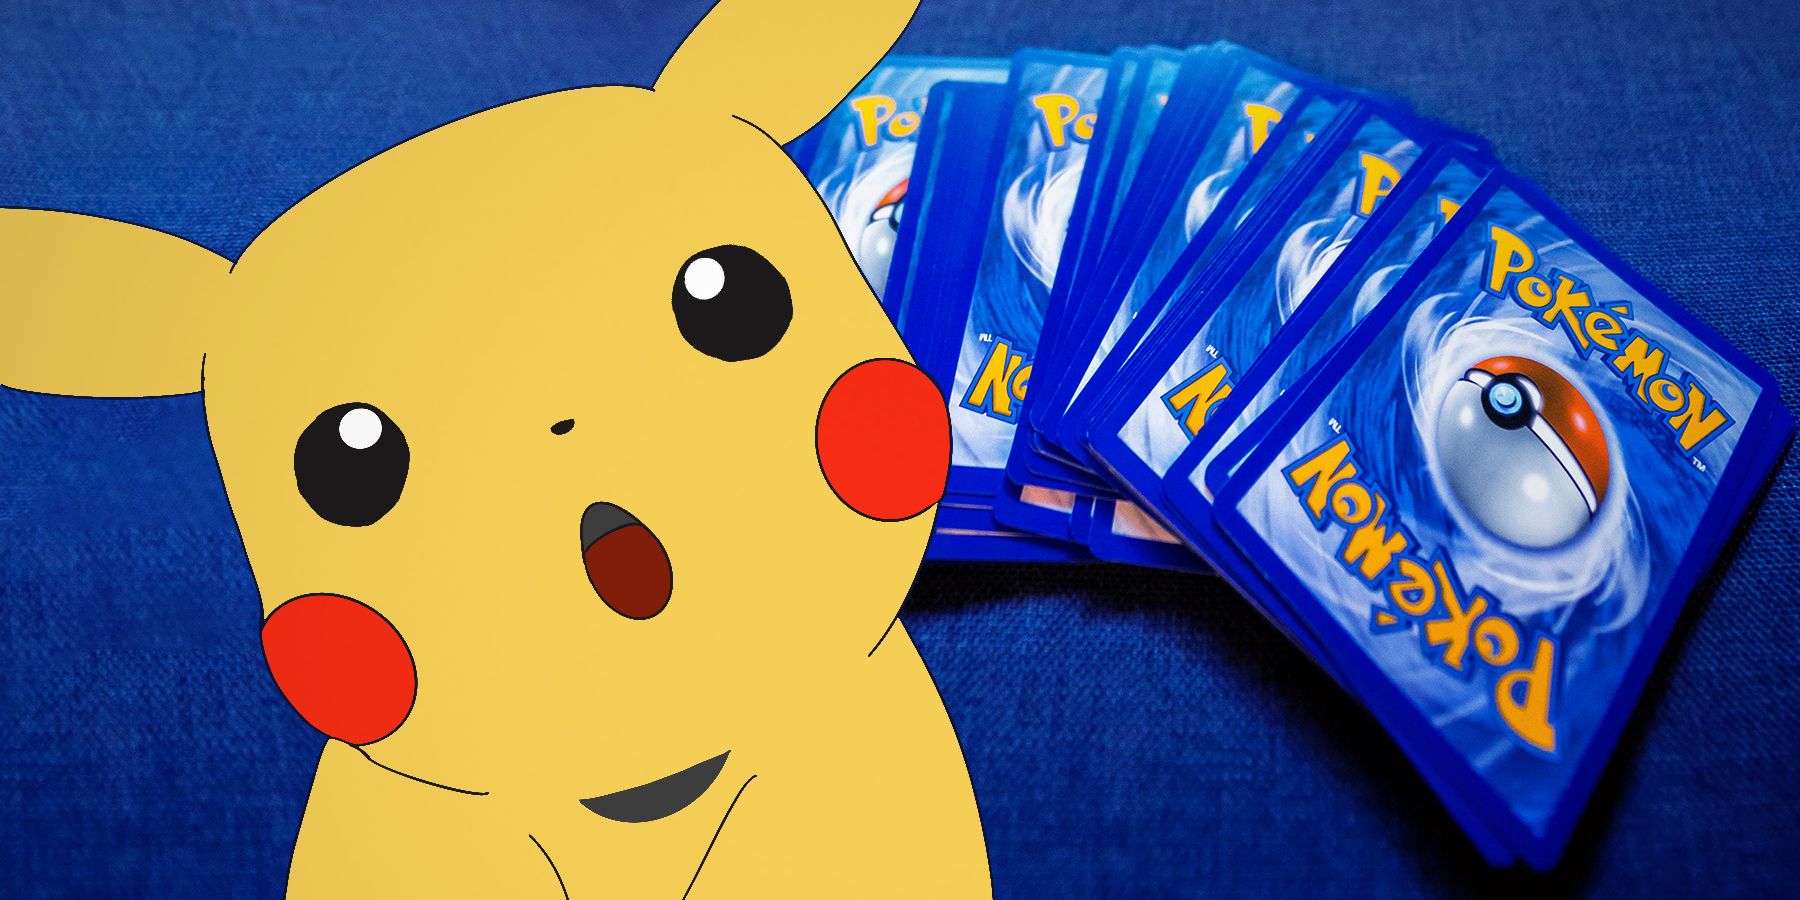 Amazed-looking Pikachu in front of Pokemon TCG cards face-down